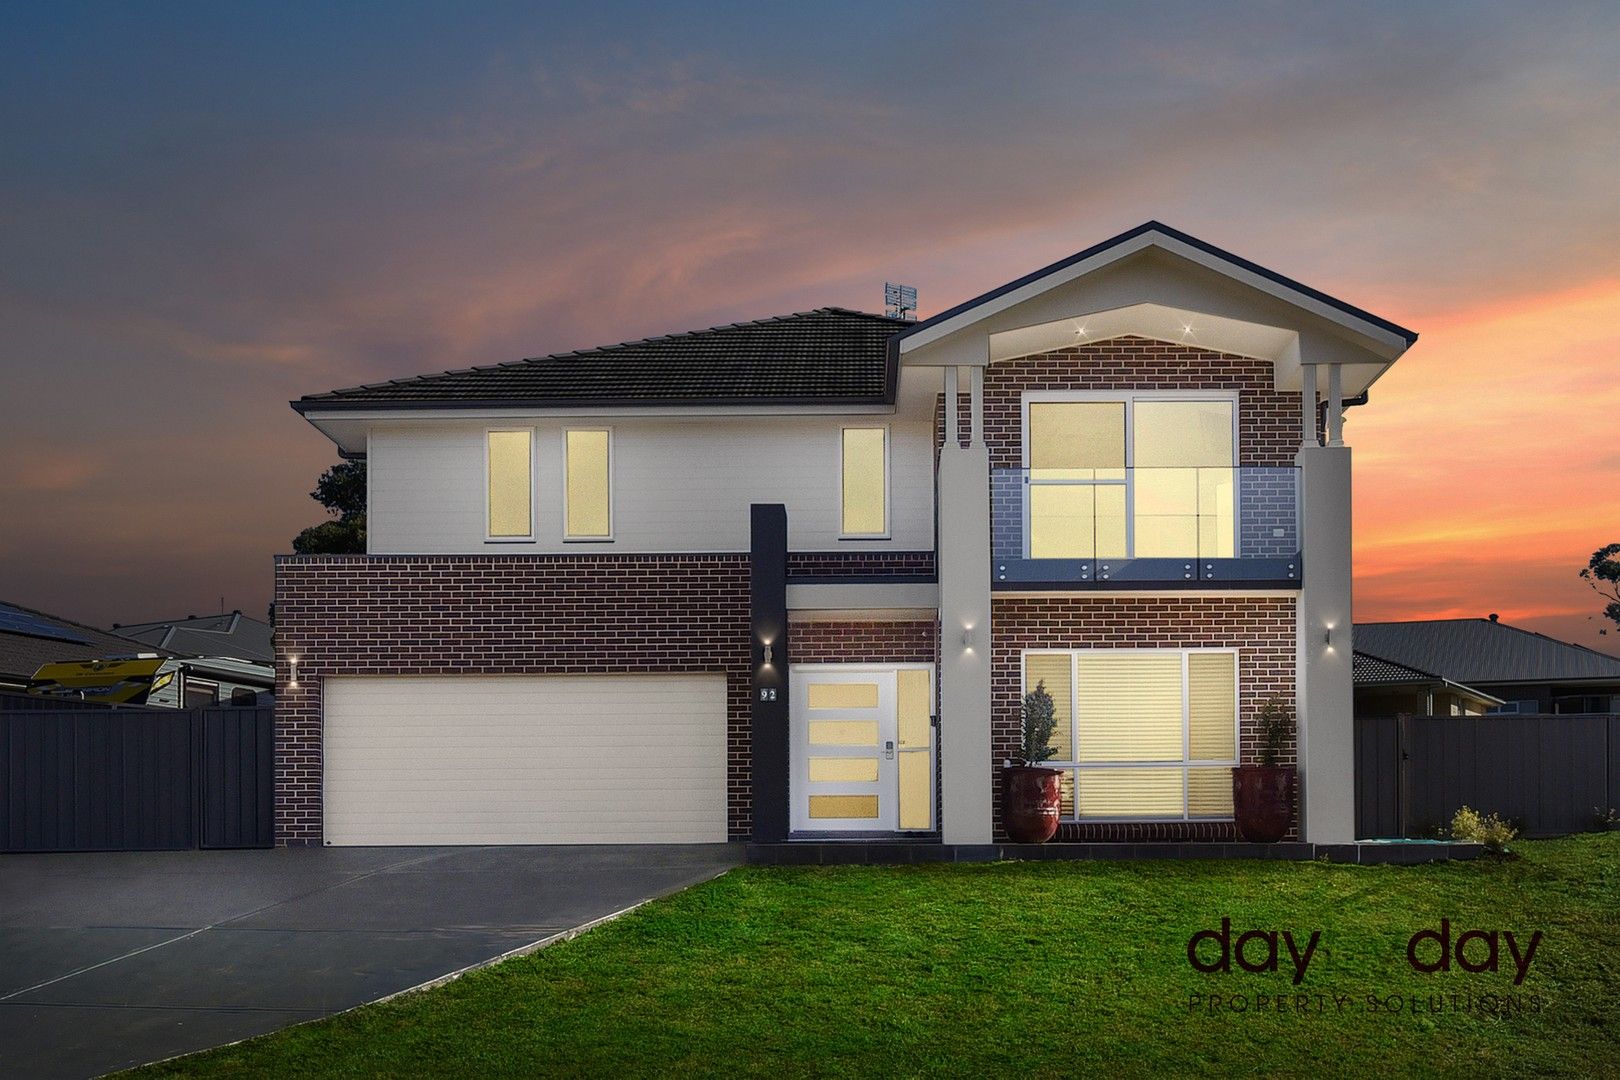 5 bedrooms House in 92 Churnwood Drive FLETCHER NSW, 2287